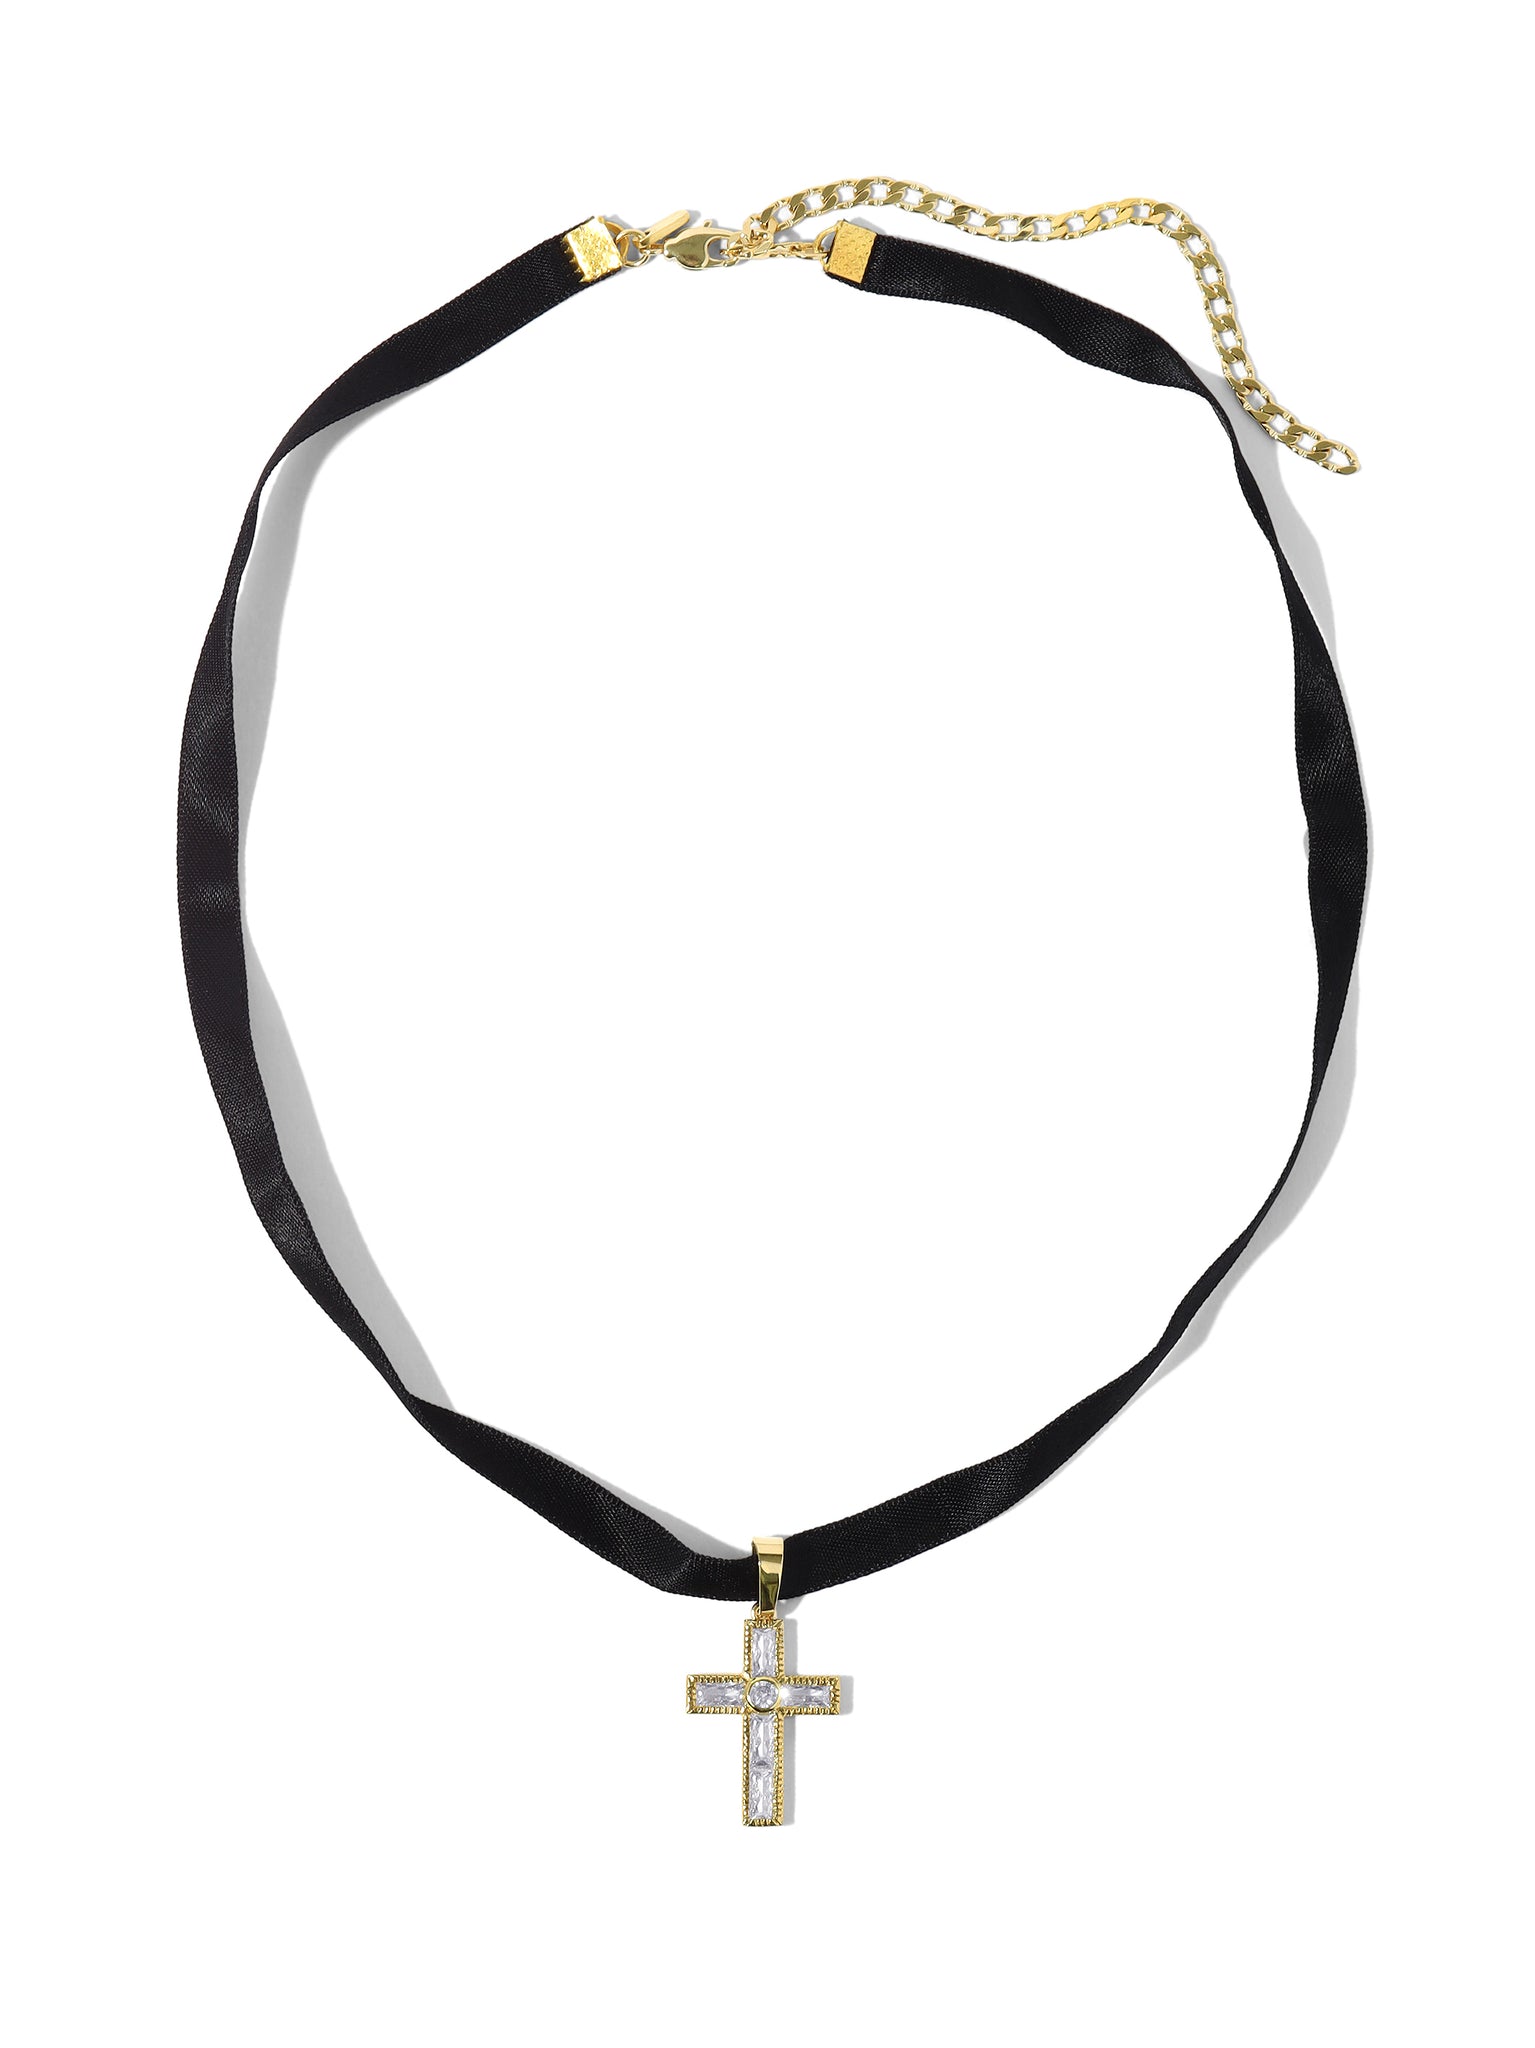 Cross choker necklace 2 mm 925 gold plated silver and white crystal |  online sales on HOLYART.com